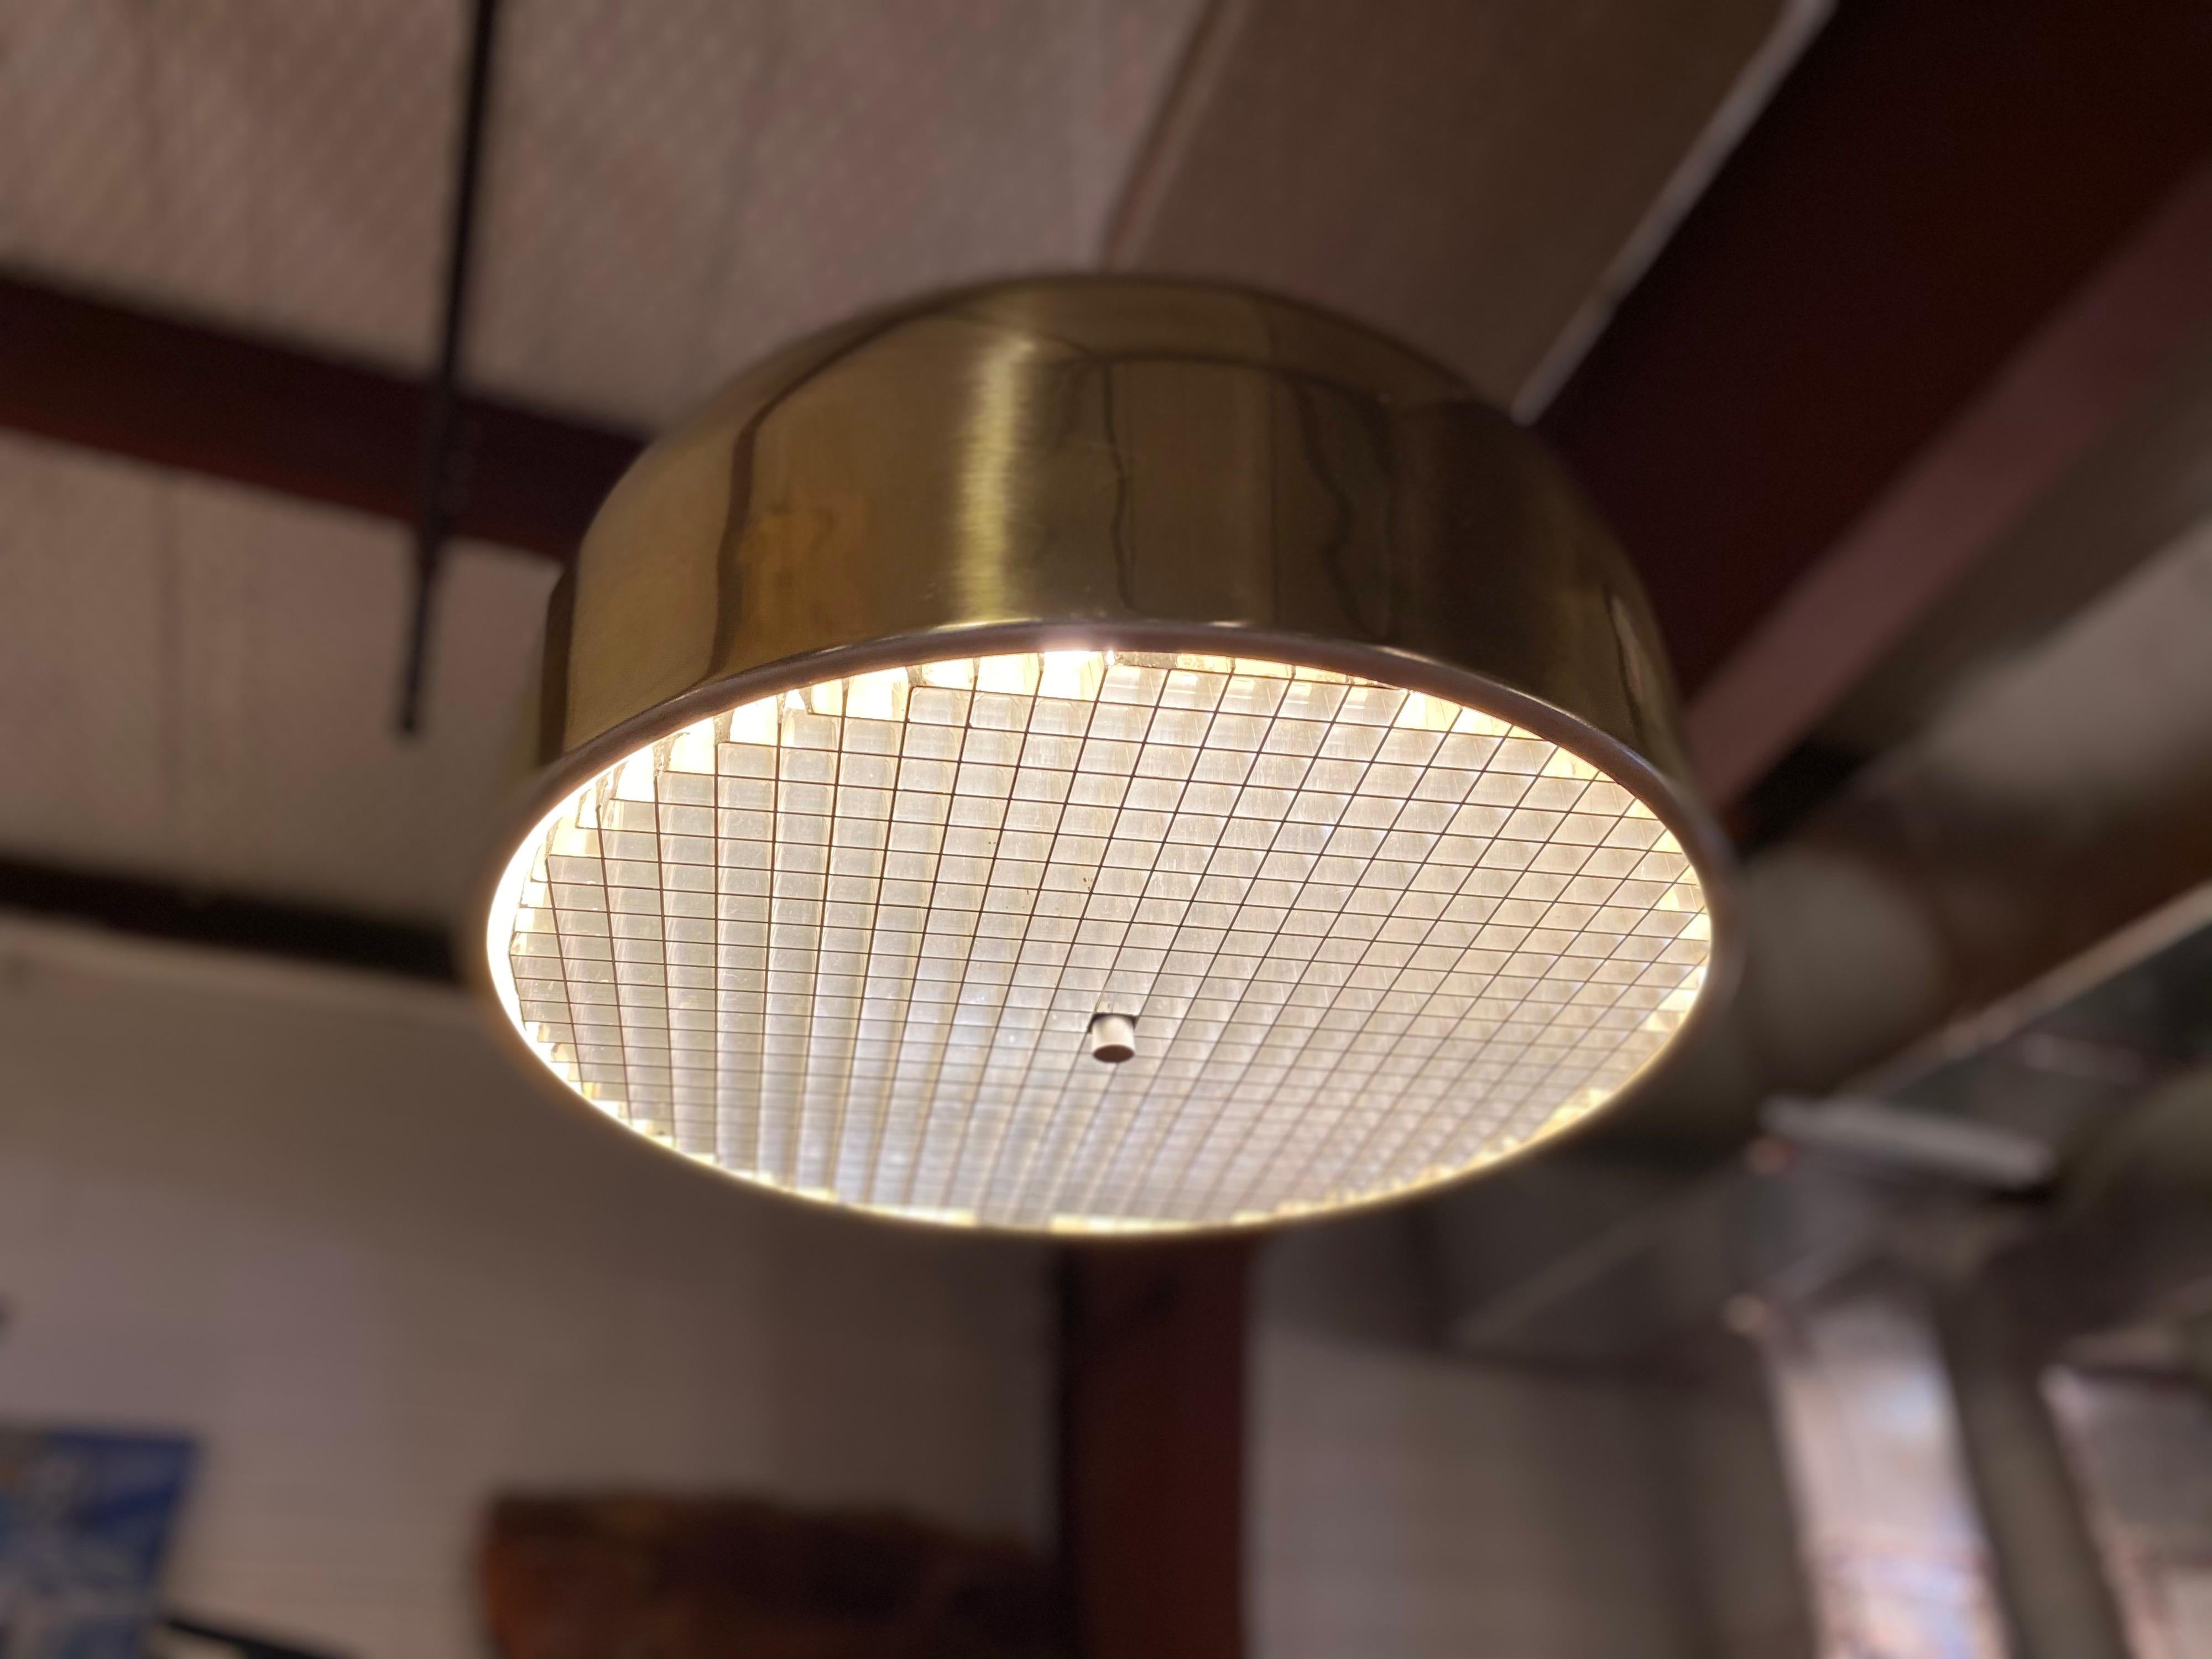 Beautiful pendant light by Lightolier made of brass and features a thick lens diffuser. This mid-century pendant light is in great overall condition.